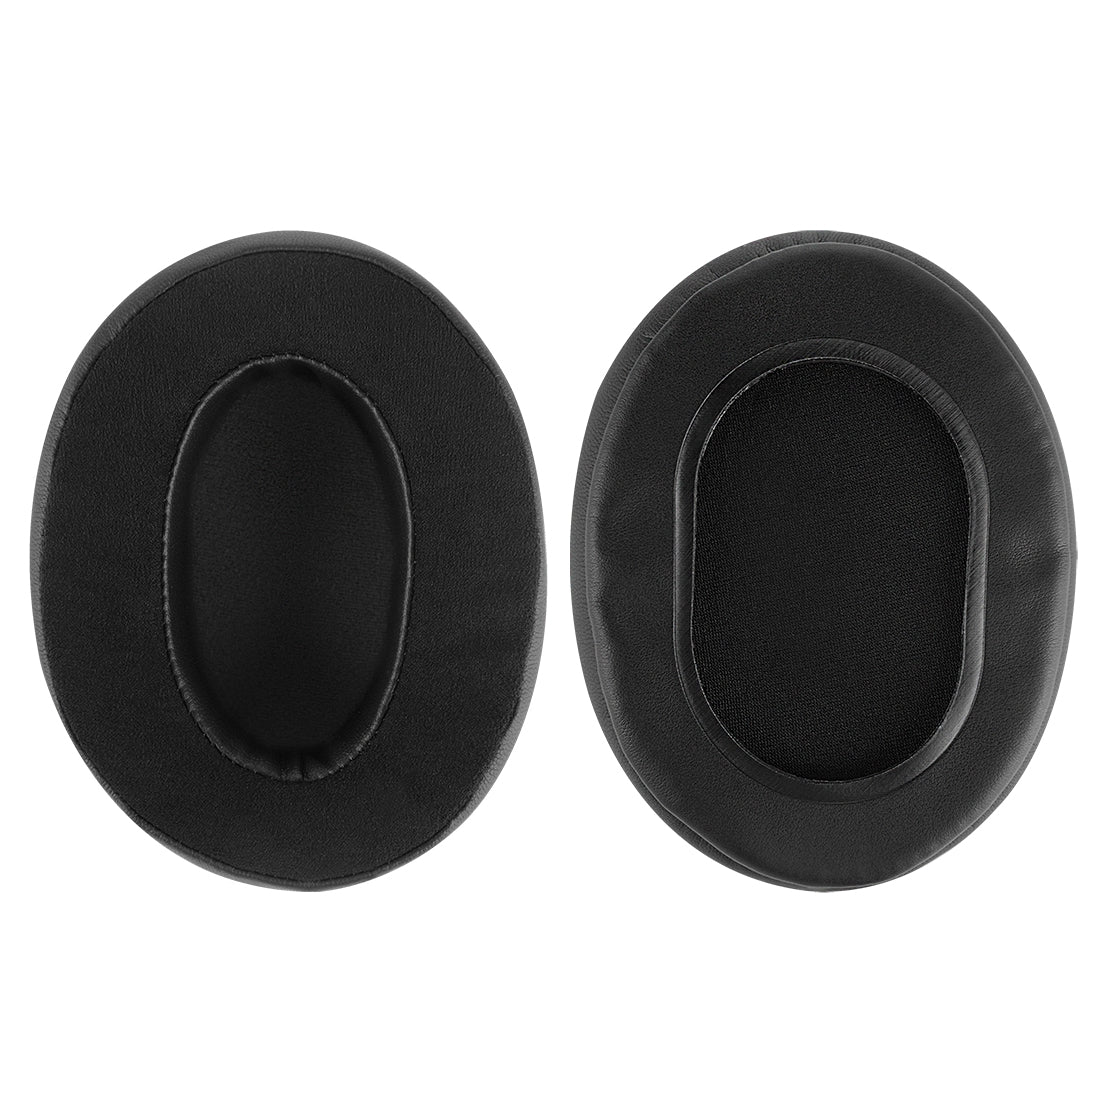  Geekria Comfort Velour Replacement Ear Pads for HyperX